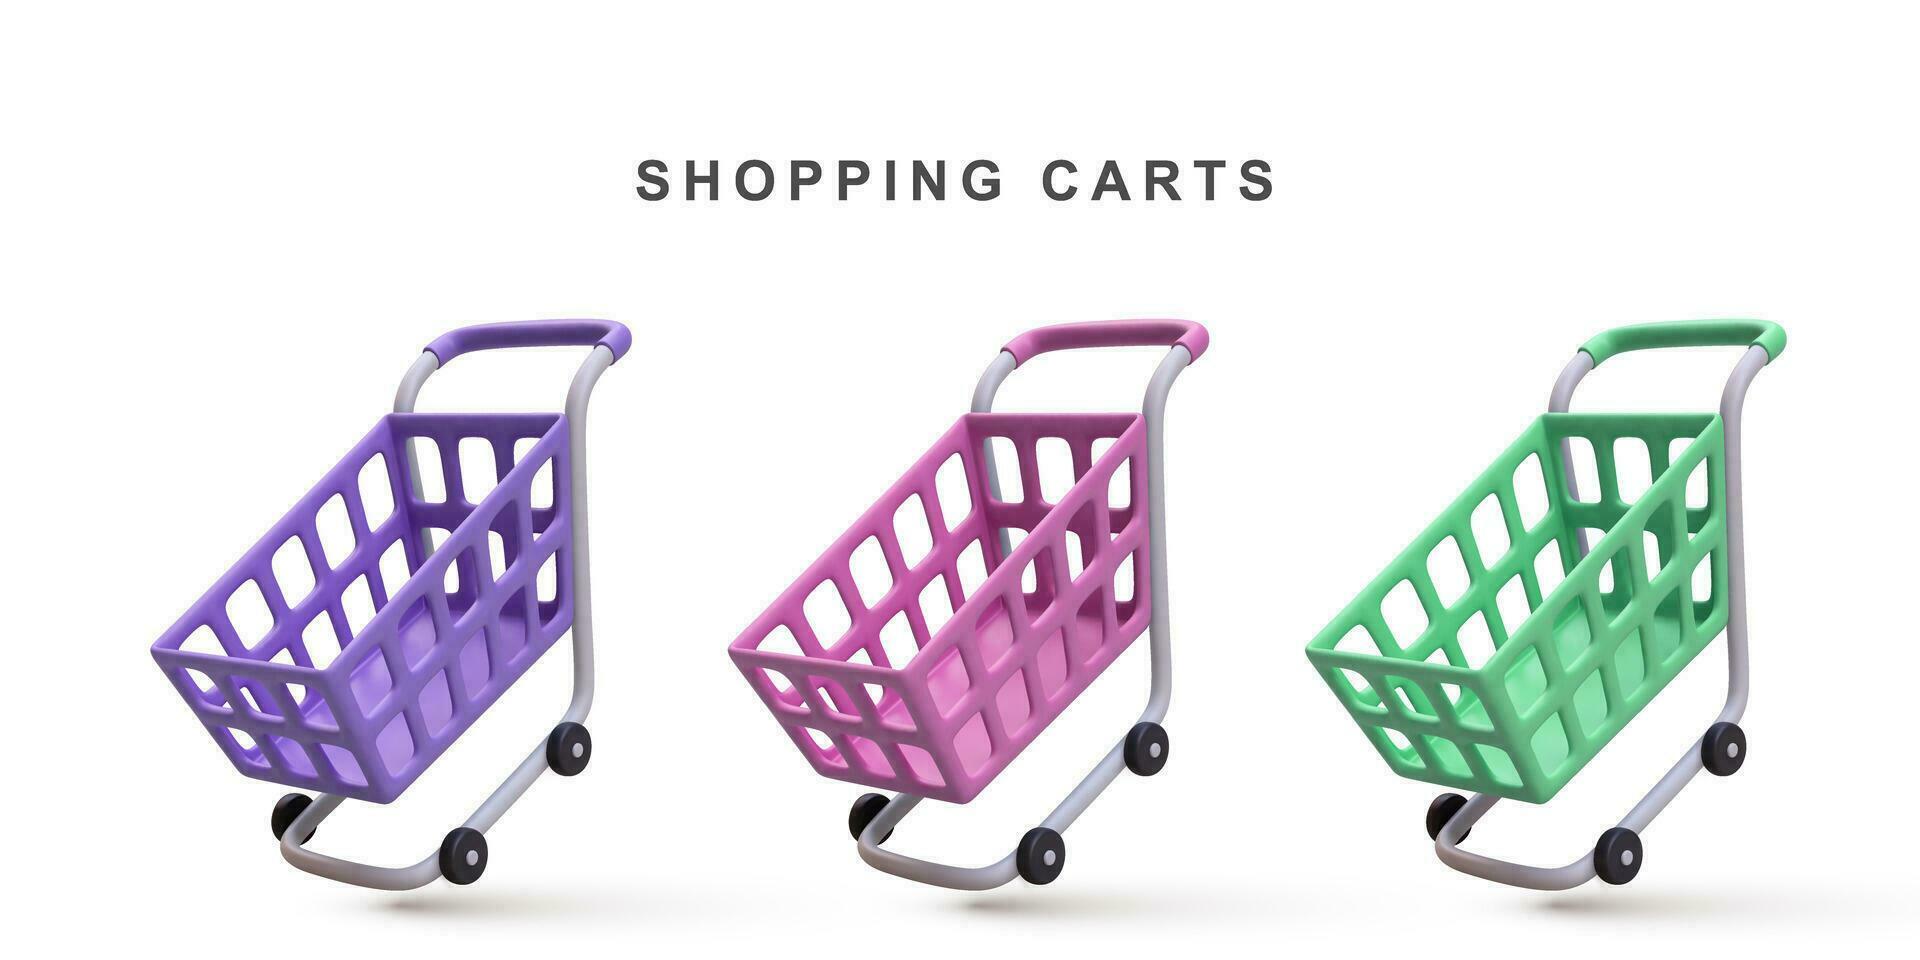 3d realistic set of shopping carts isolated on white background. Vector illustration.